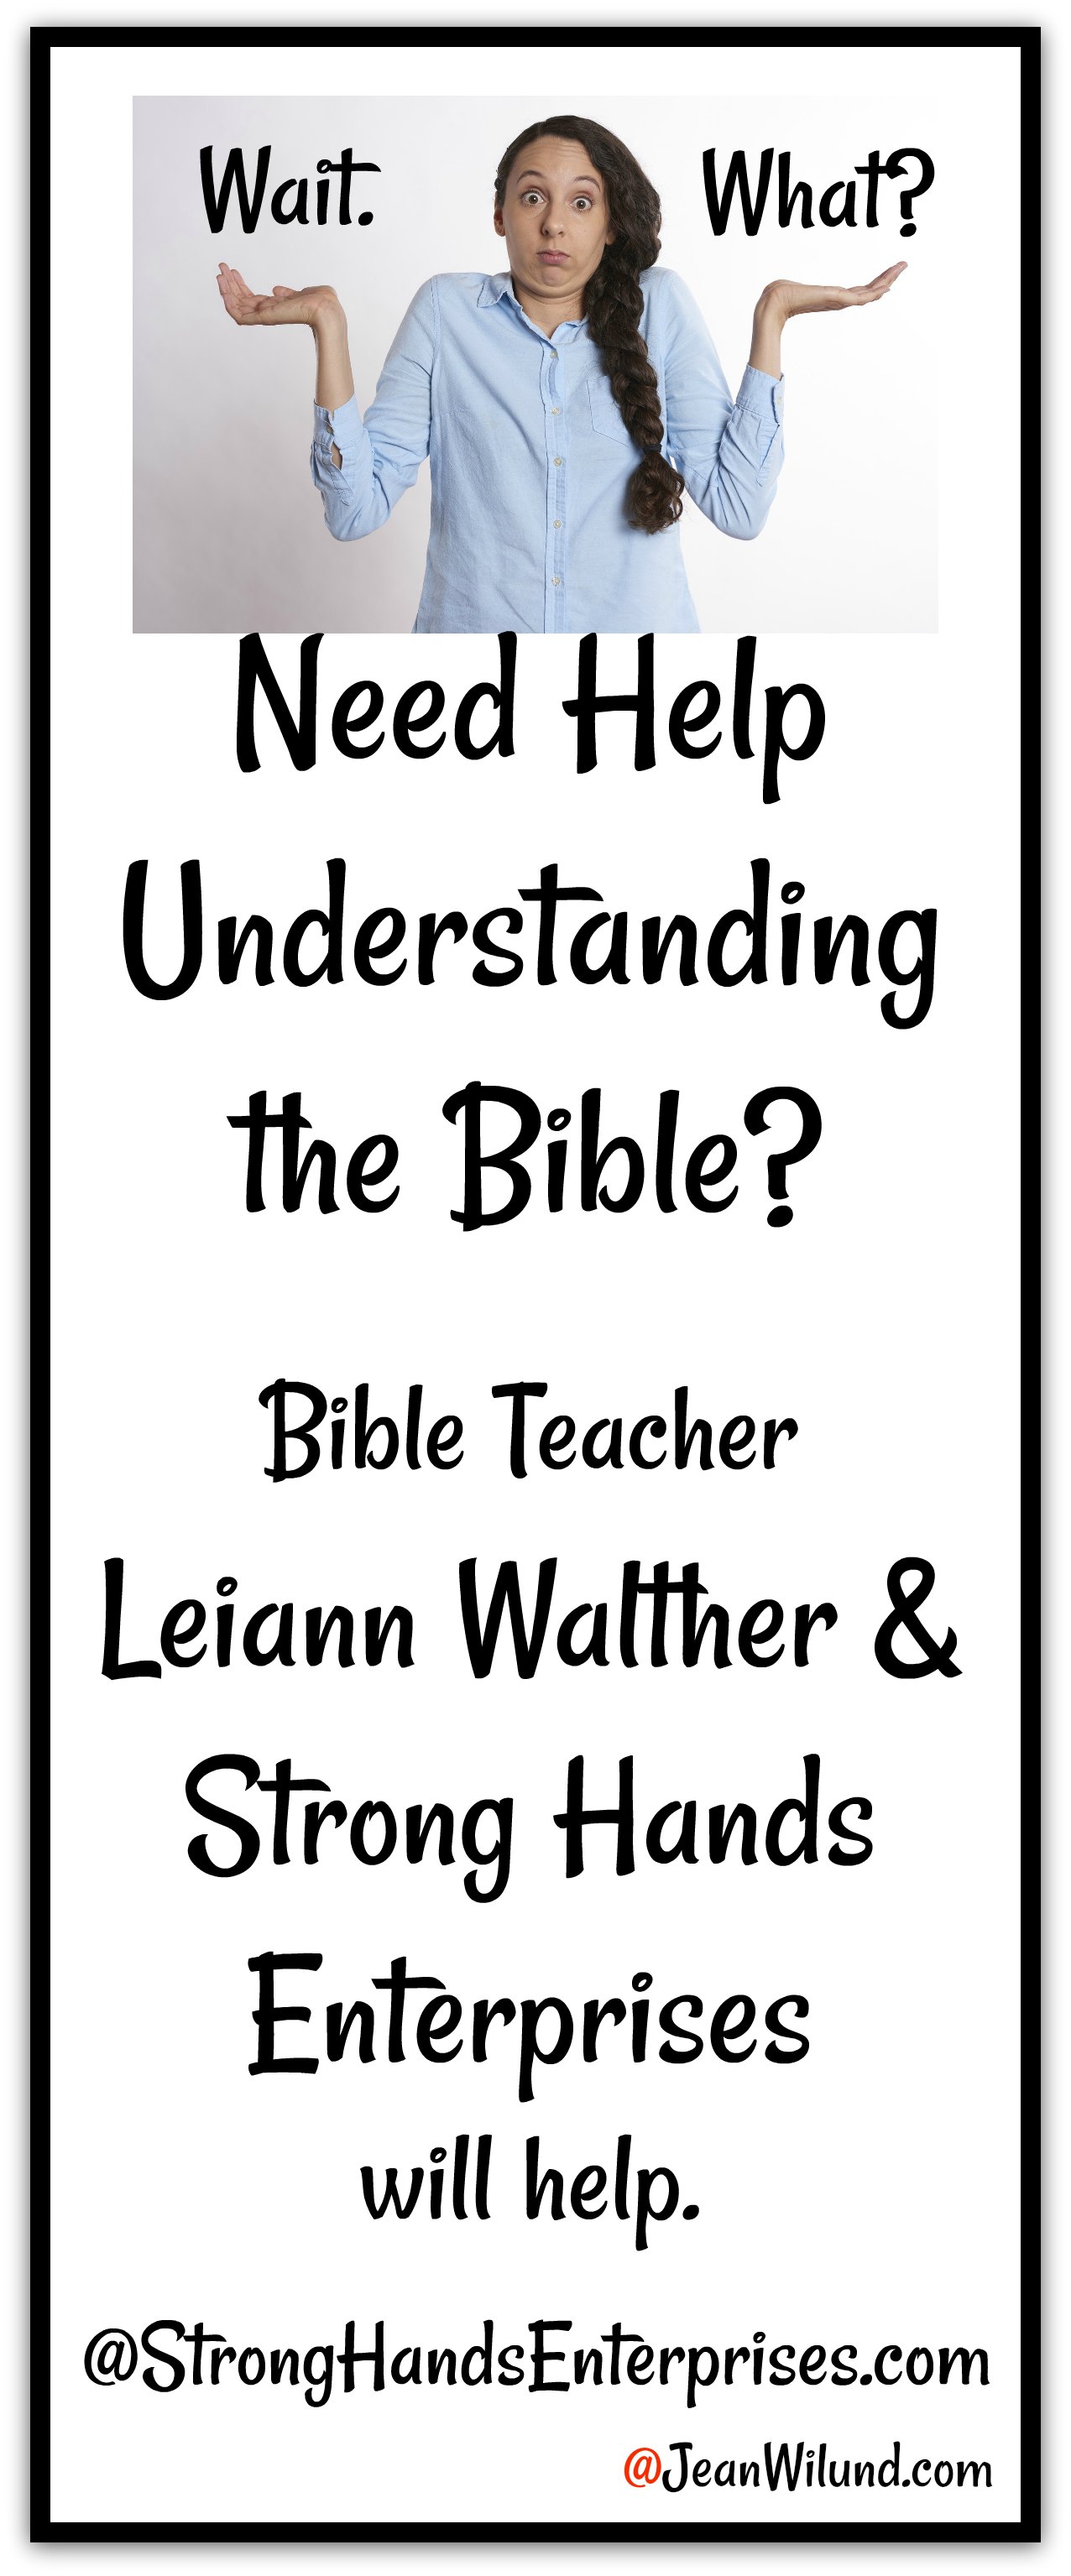 Leiann Walther and Strong Hands Enterprises Helps You Understand the Bible via www.JeanWilund.com